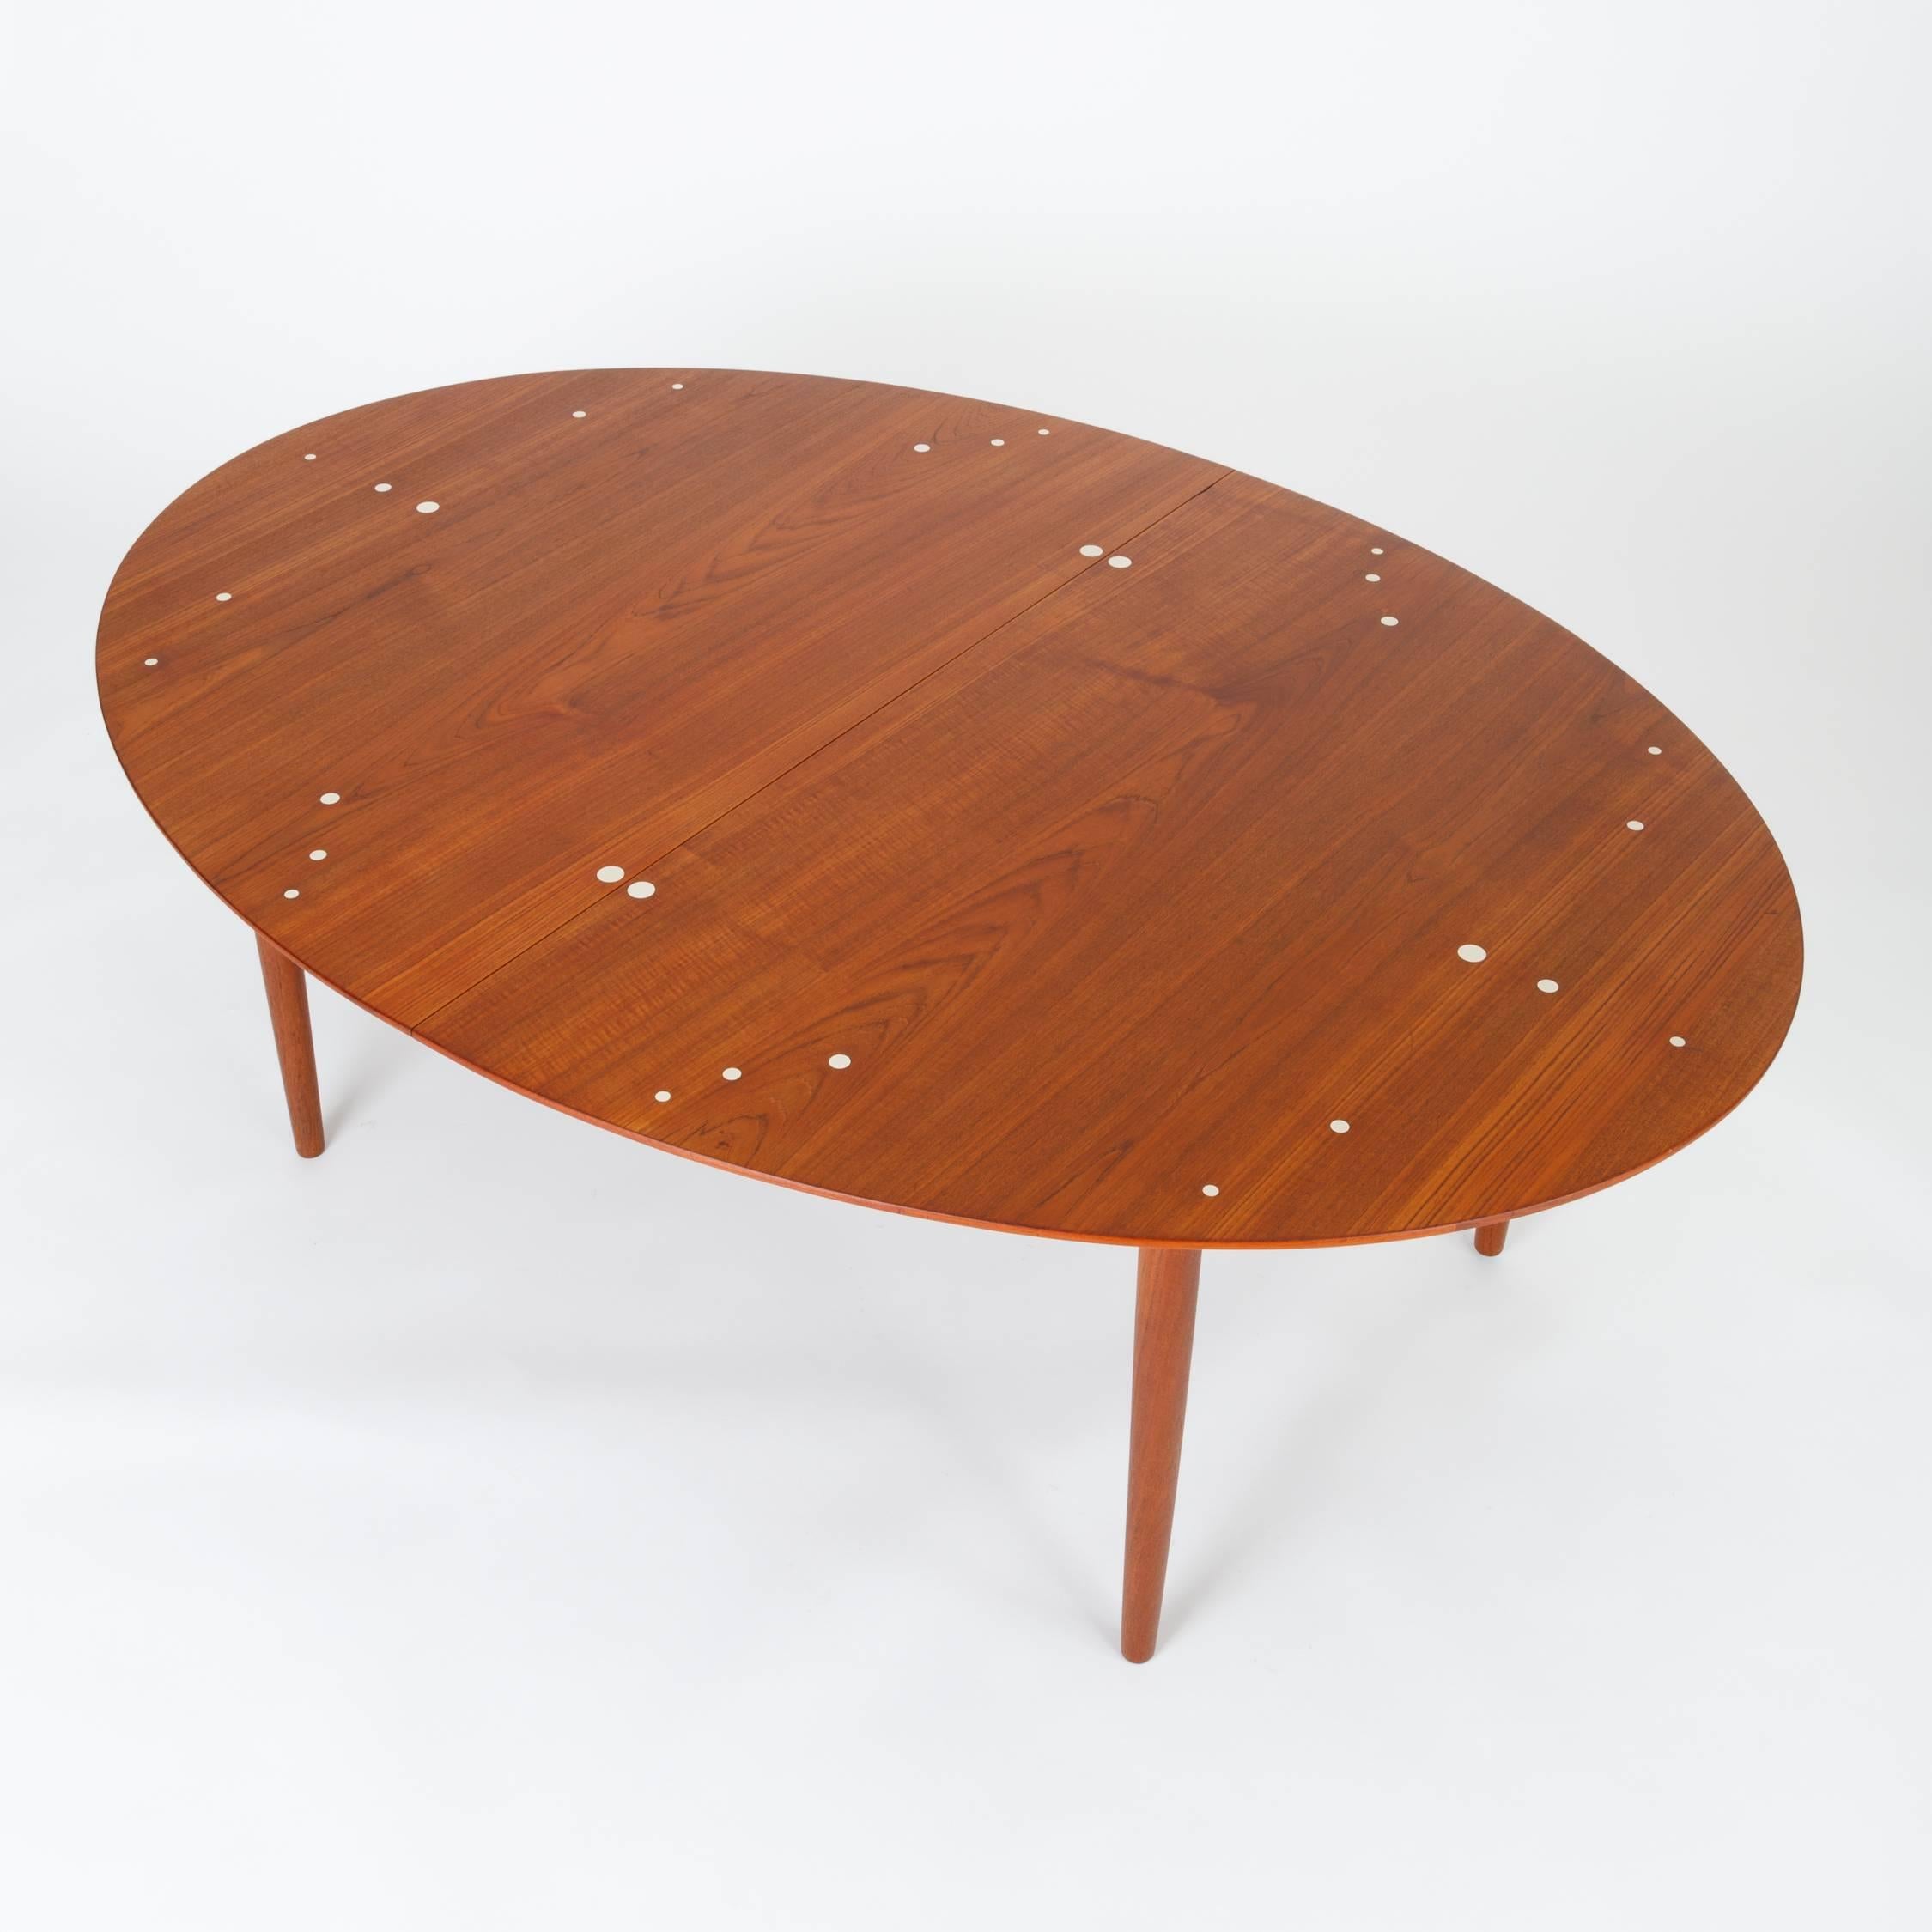 An extendable Danish teak dining table with sterling silver inlay designed by Finn Juhl and produced by cabinetmaker Niels Vodder. The colloquially-named Judas table has 30 sterling silver 'coin' inlays, demarcating the placement of chairs and place